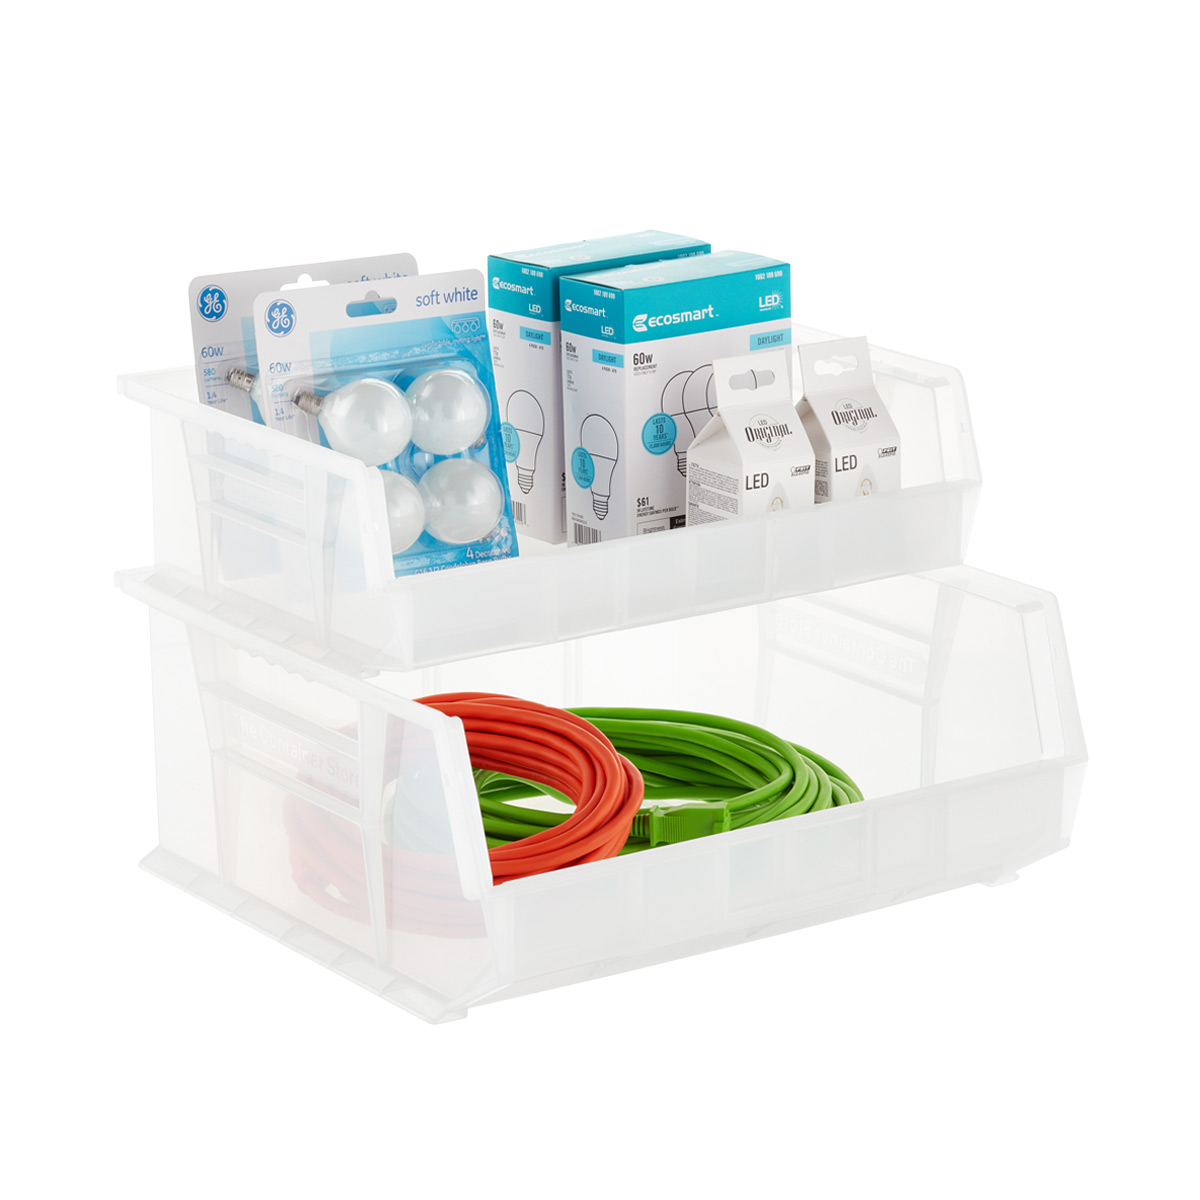 https://www.containerstore.com/catalogimages/338268/10073796g-quantum-utility-bin-extra-.jpg